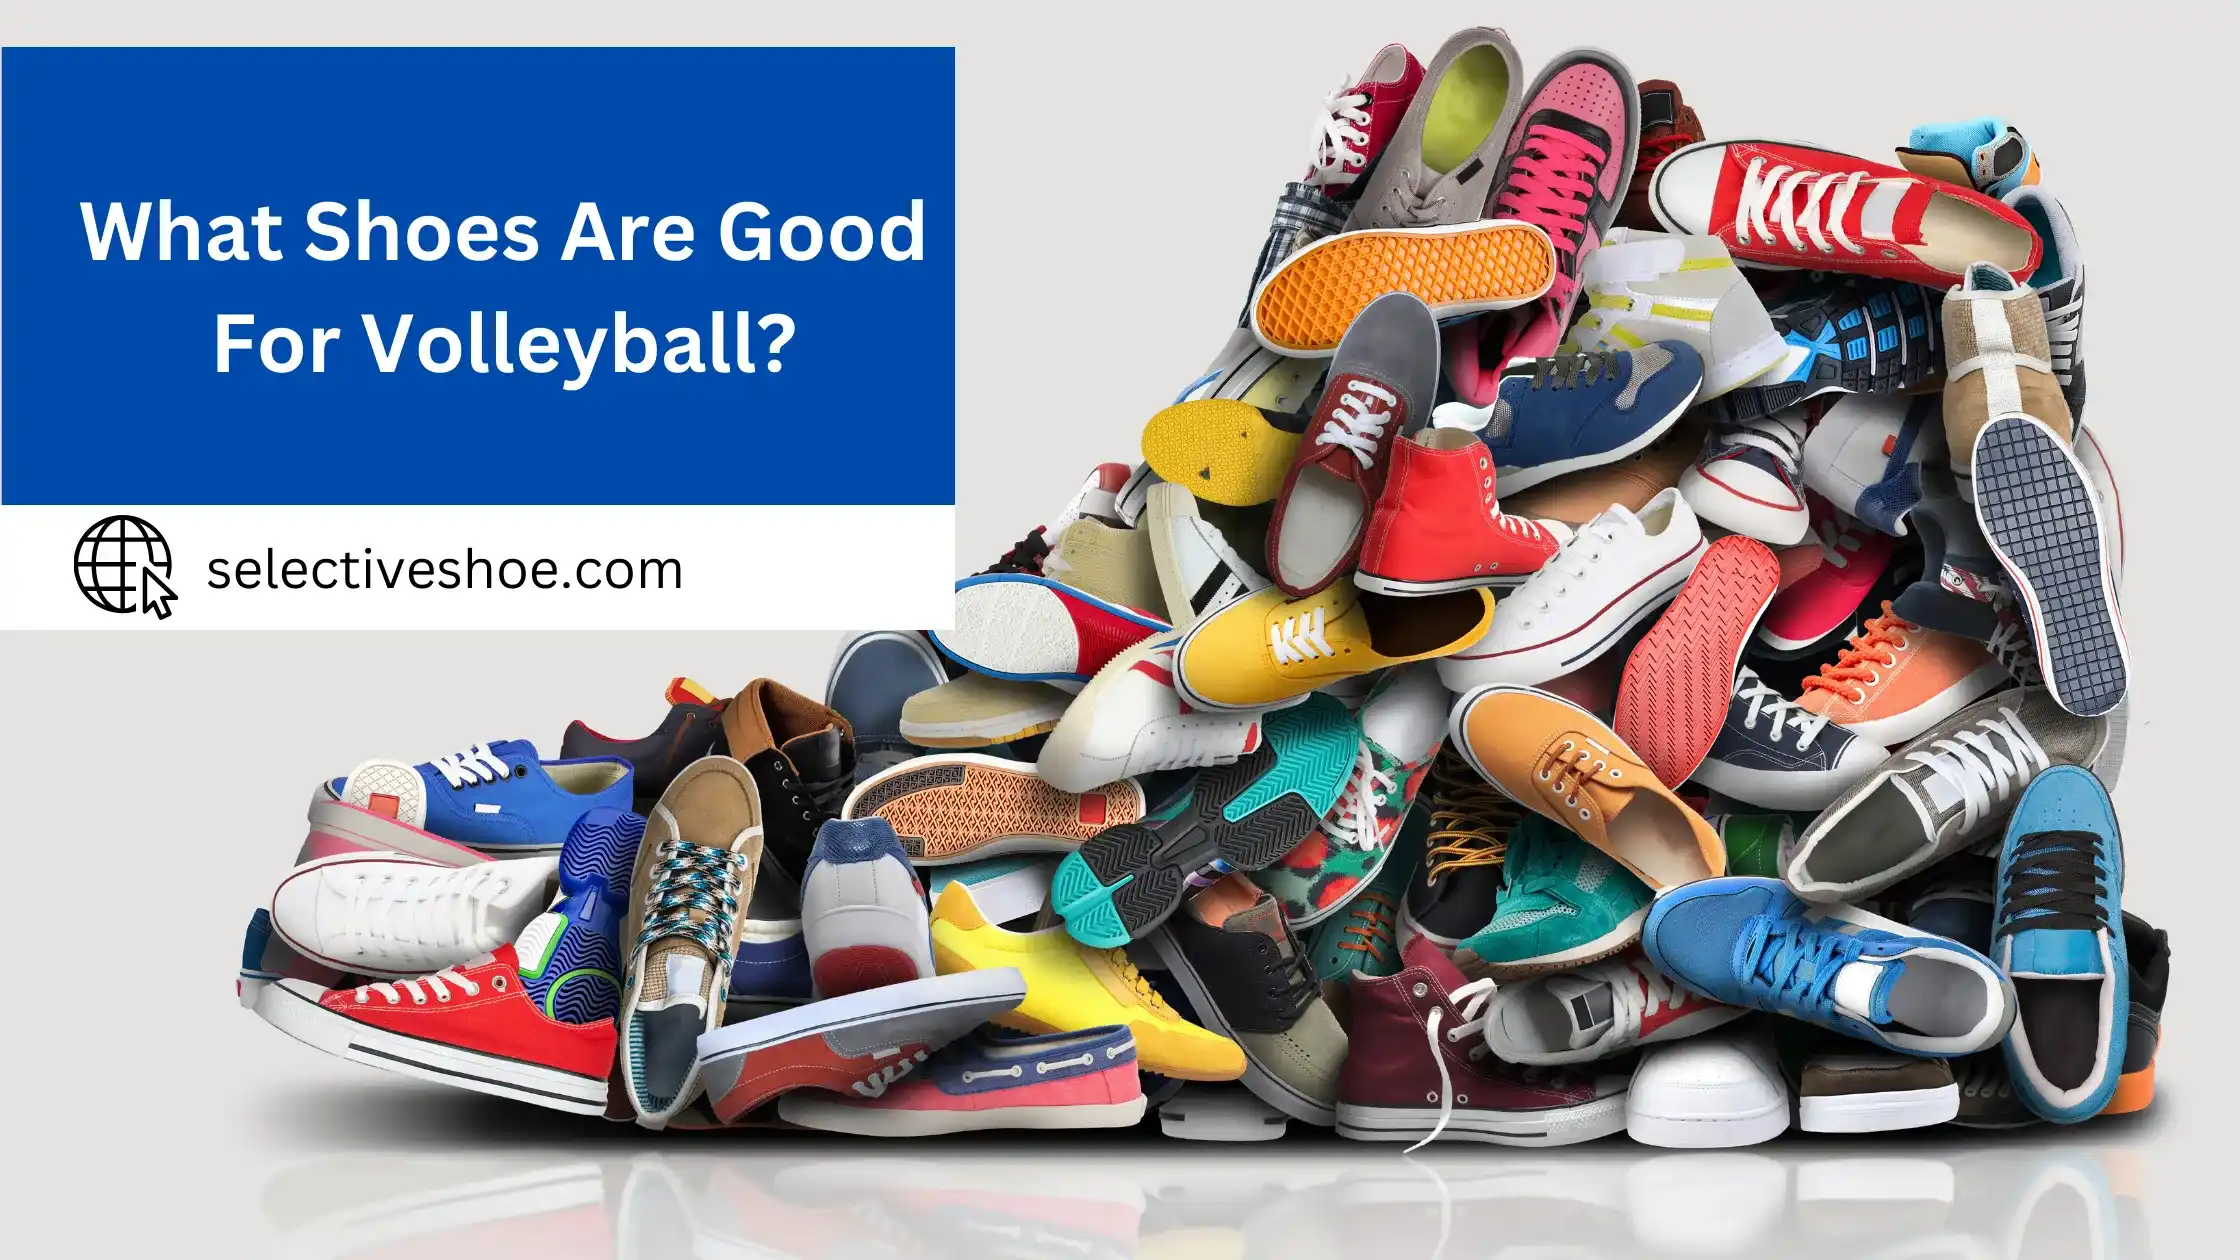 What Shoes Are Good For Volleyball? A Detailed Analysis